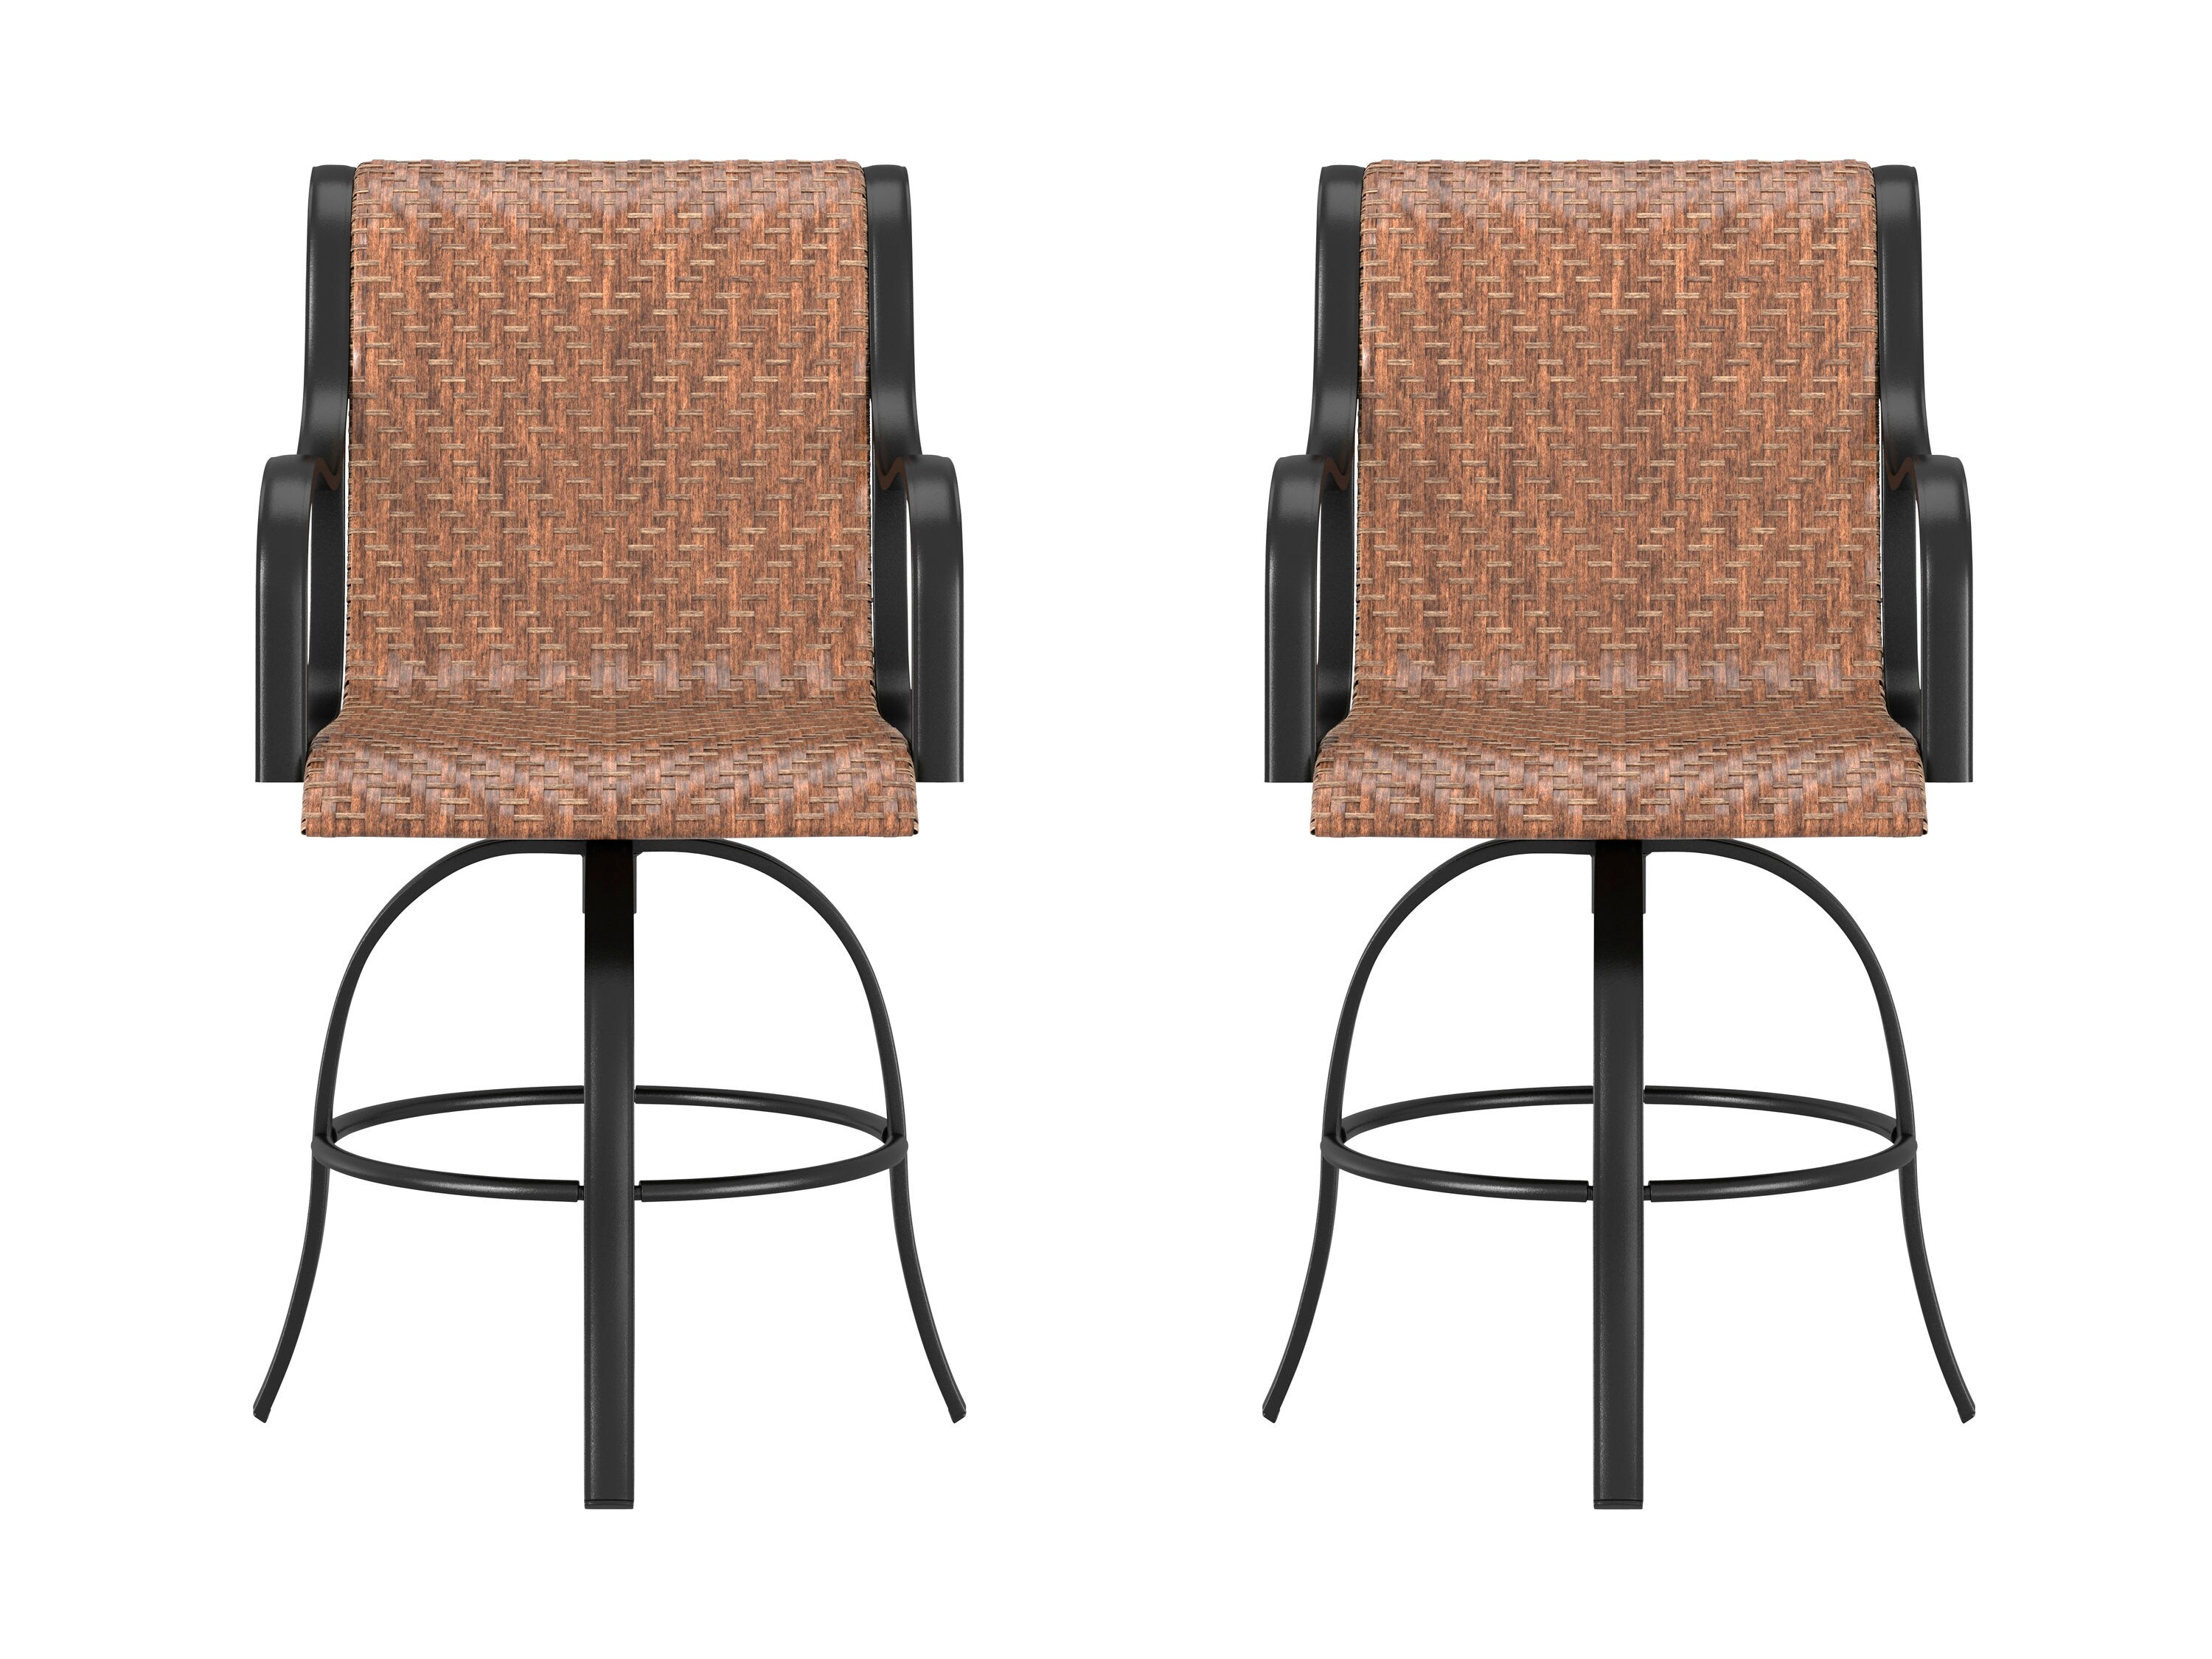 2-Pc Allen + Roth Swivel Dining Chair Set on sale for $149